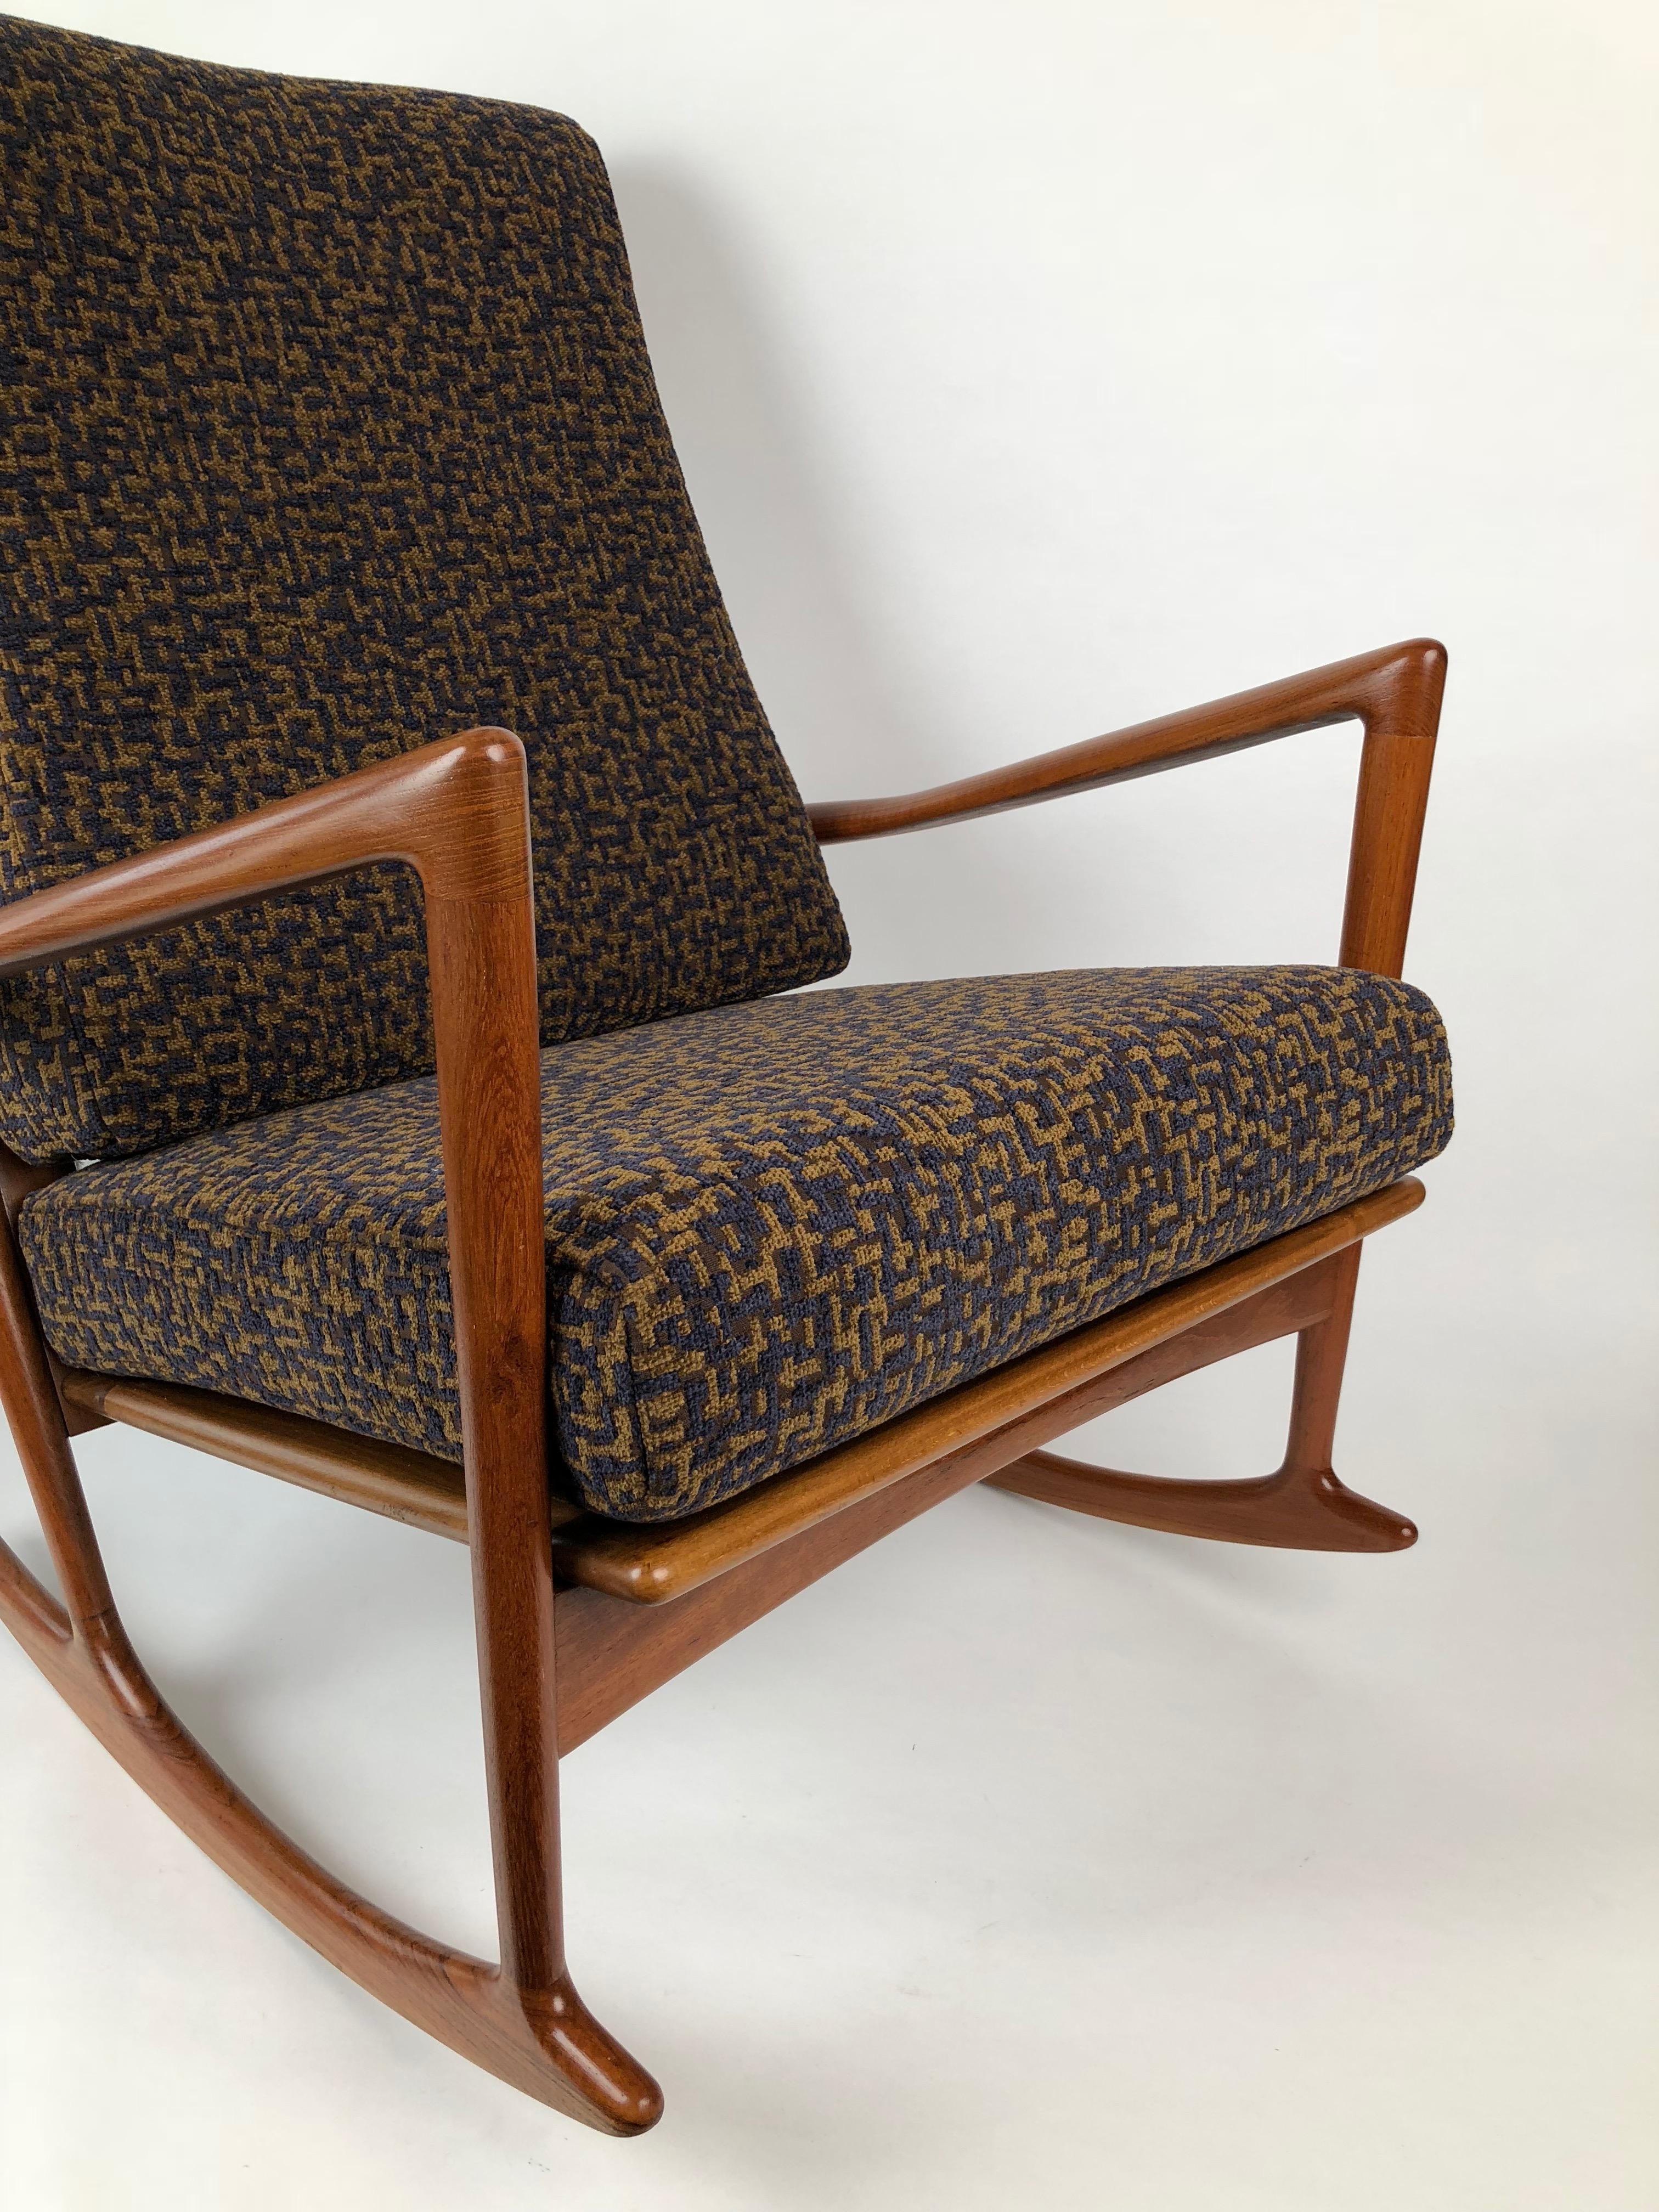 Ib Kofod-Larsen´s Rocking Chair from 1962 In Good Condition For Sale In Vienna, Austria